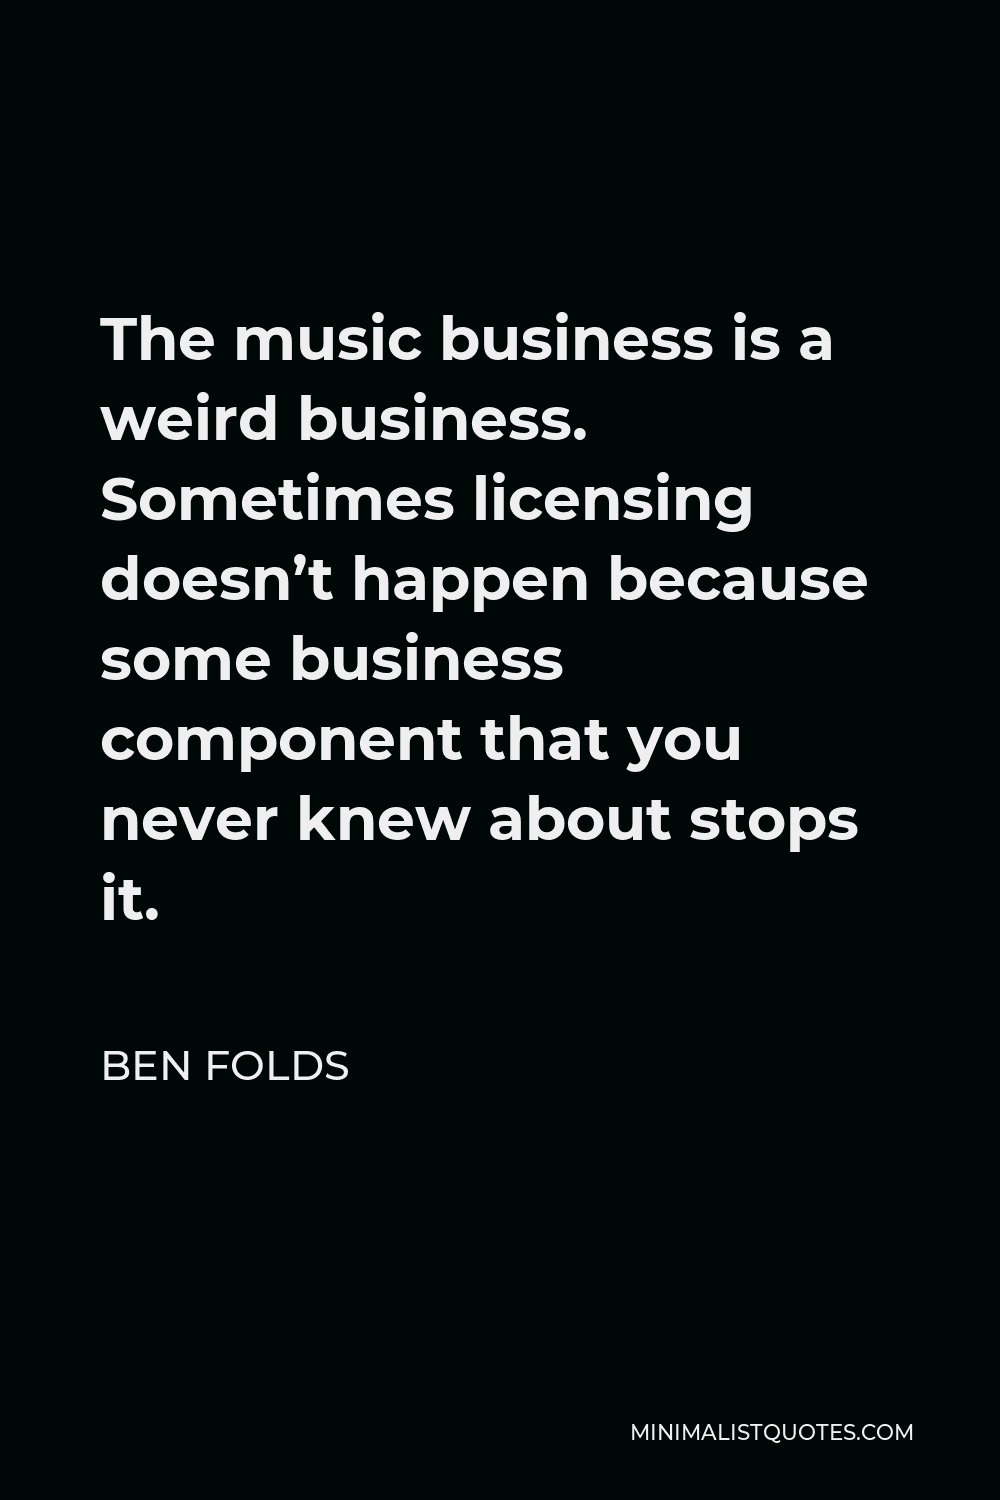 Ben Folds Quote - The music business is a weird business. Sometimes licensing doesn’t happen because some business component that you never knew about stops it.